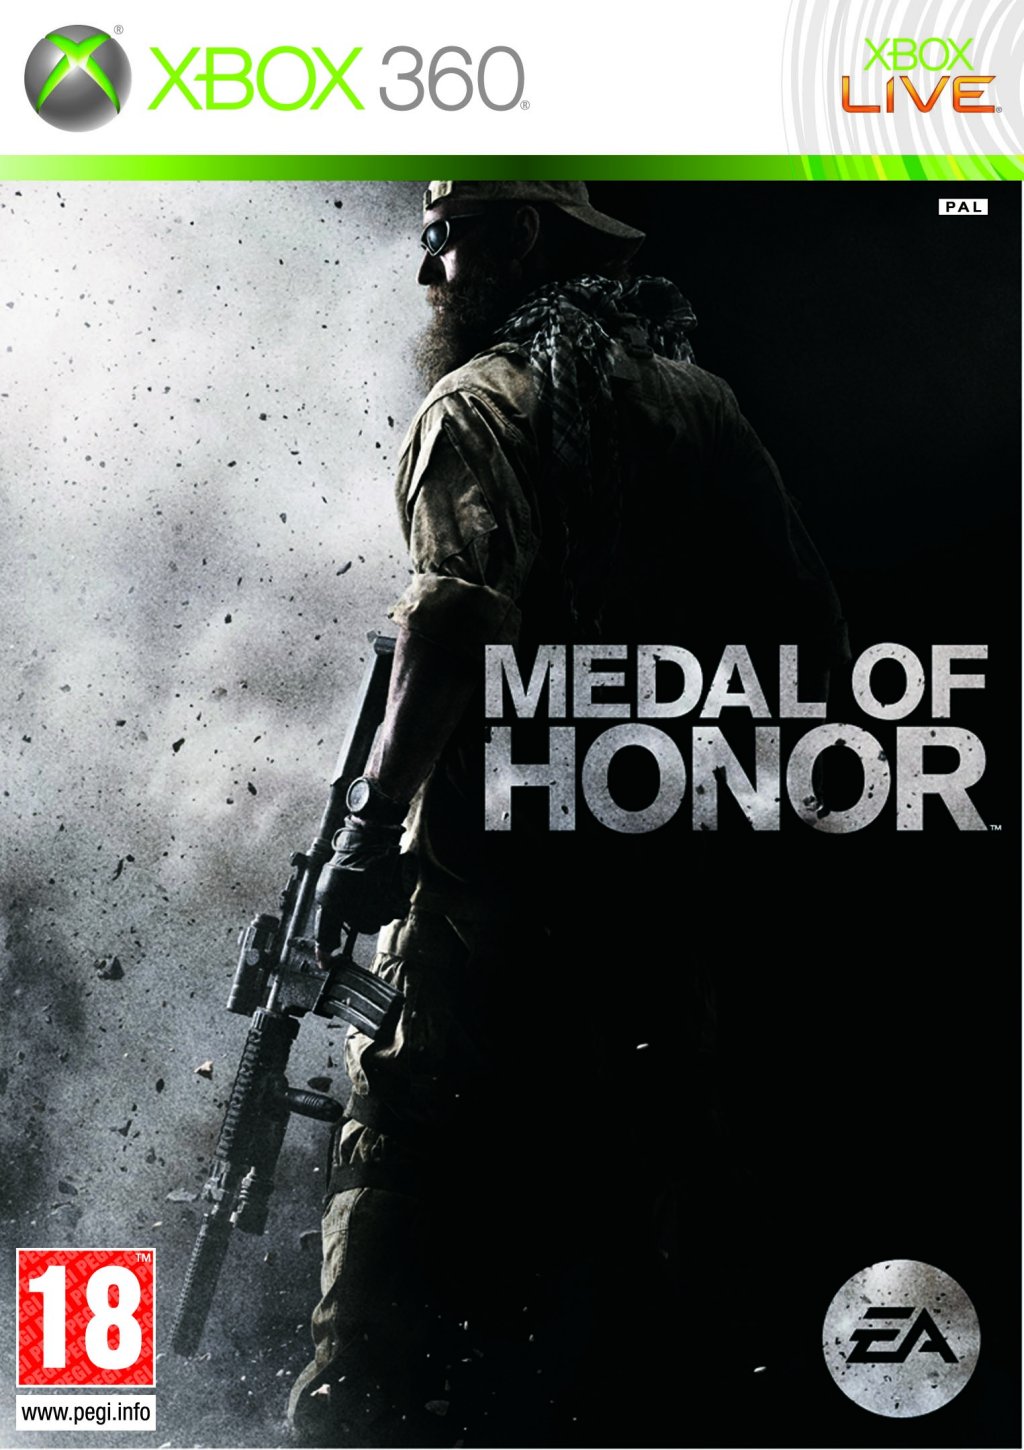 Medal of Honor Boxart Xbox 360